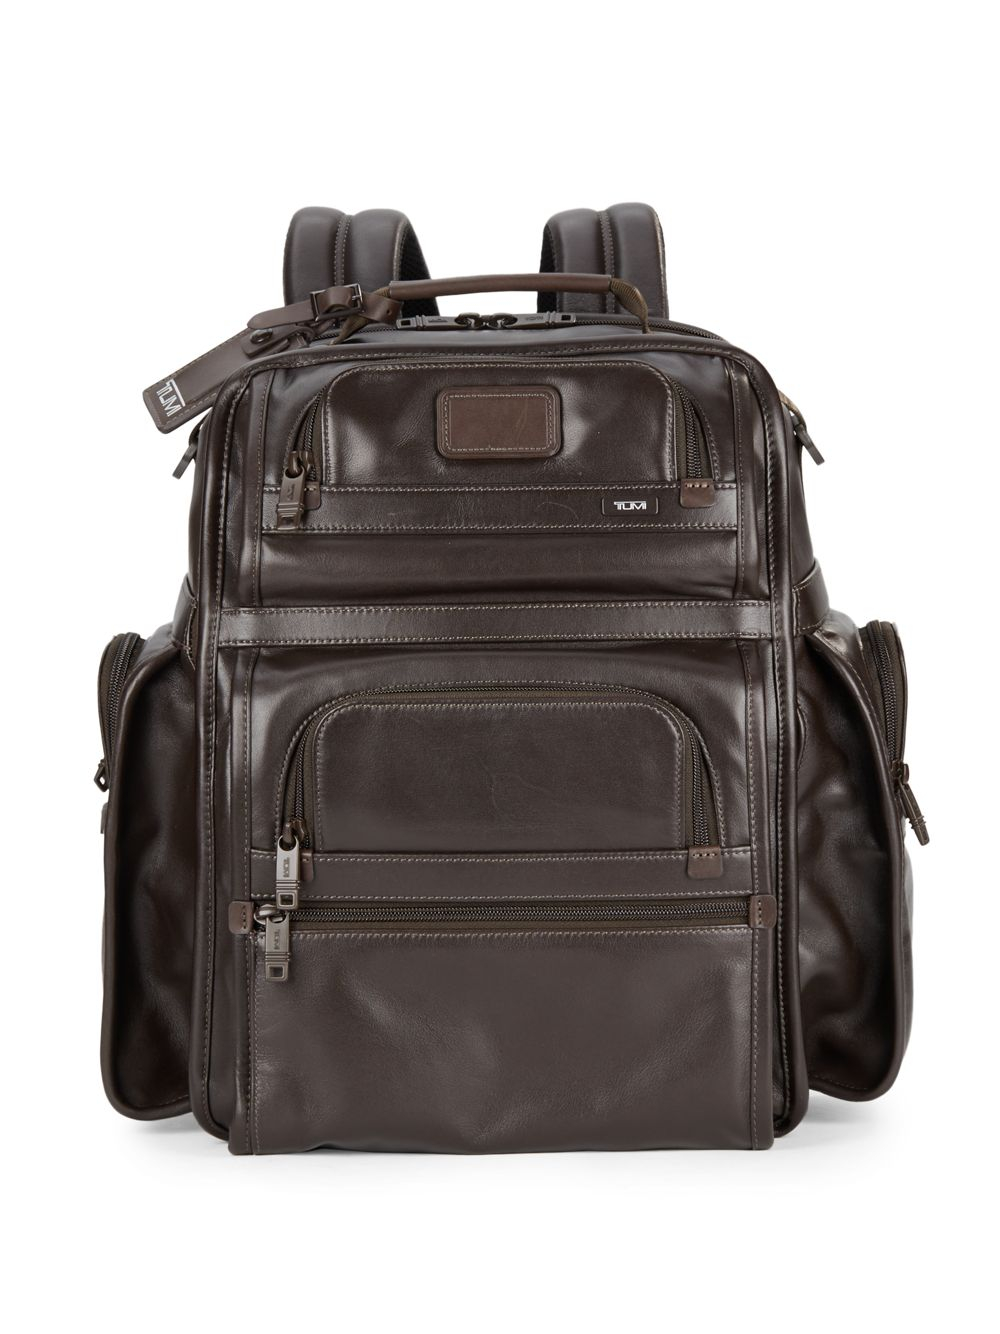 Tumi T-Pass Leather Backpack in Brown for Men - Lyst